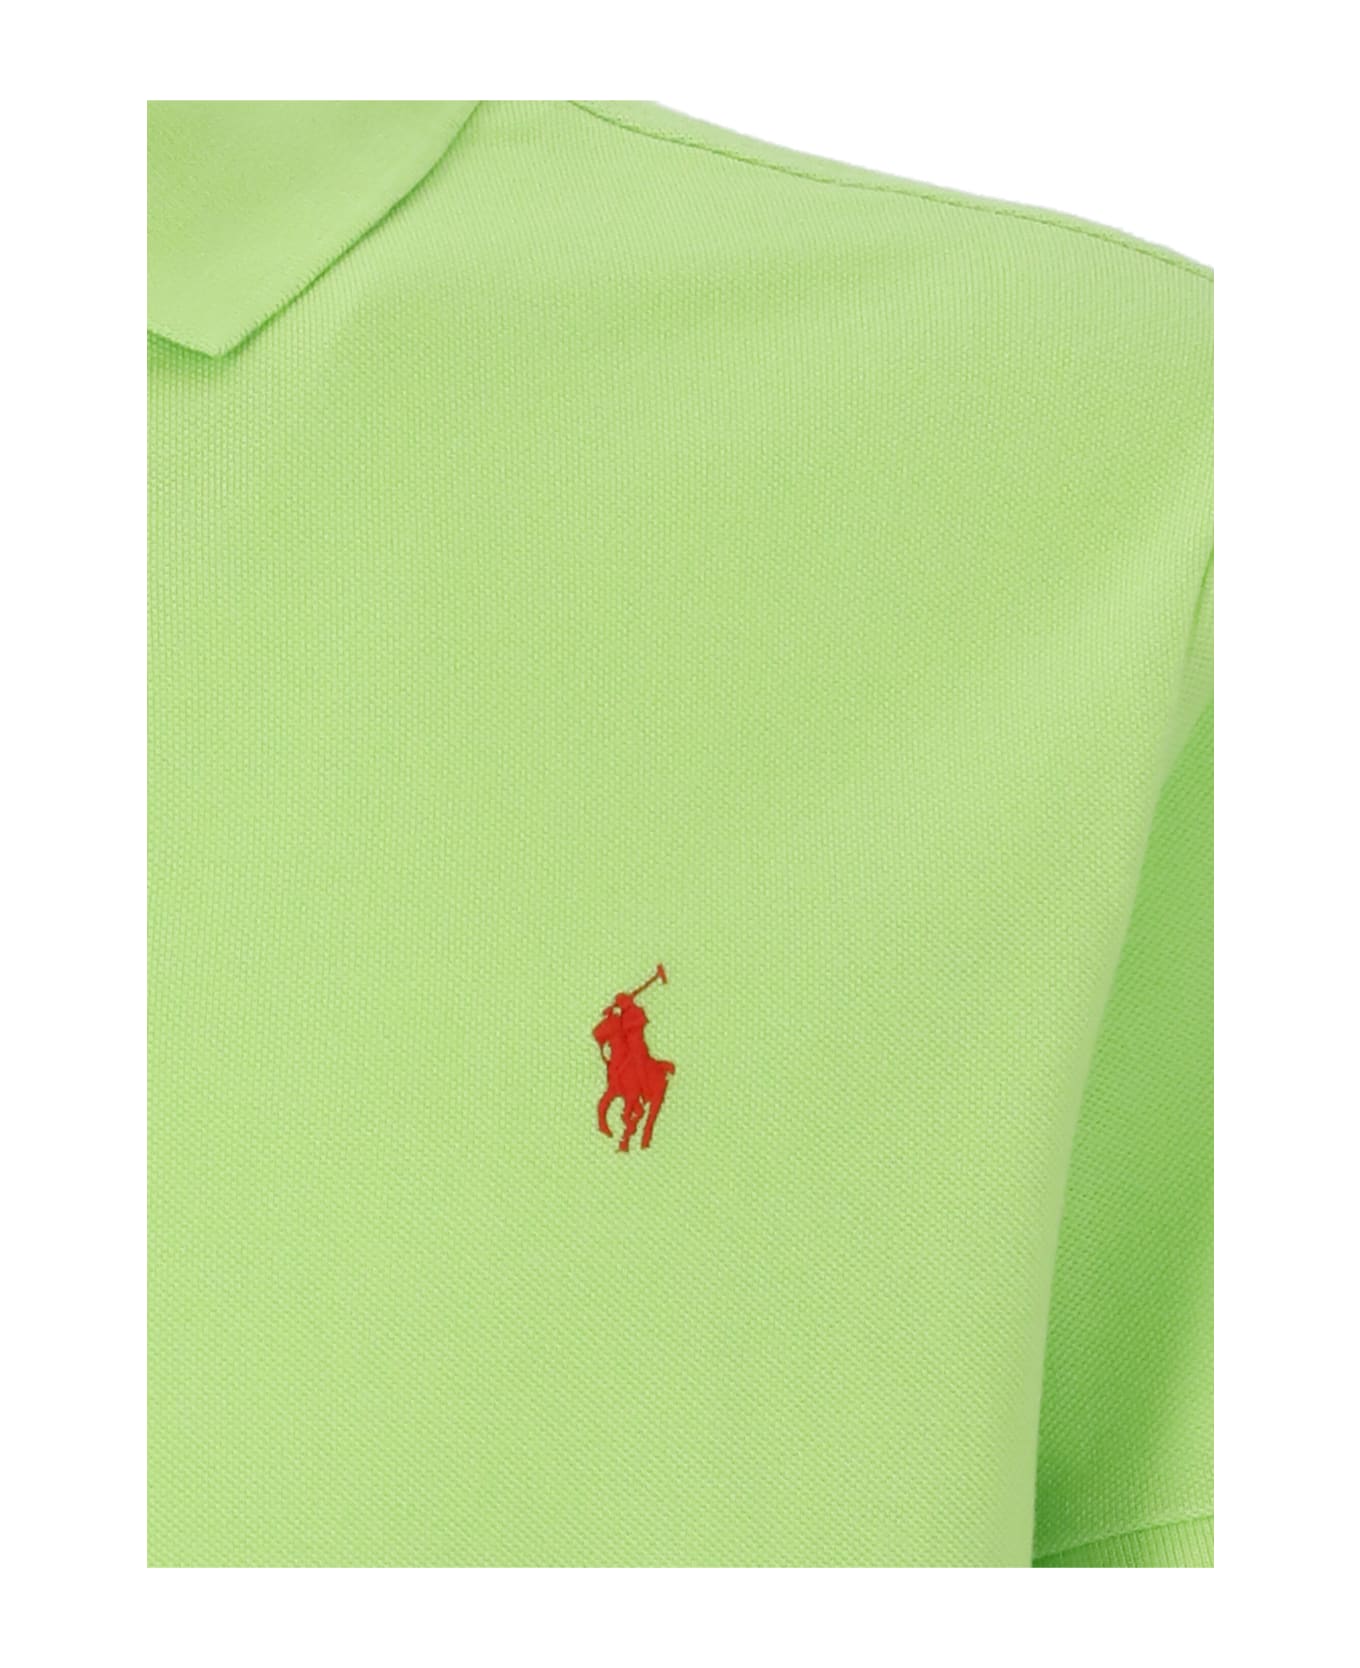 Ralph Lauren Polo Shirt With Pony - Green